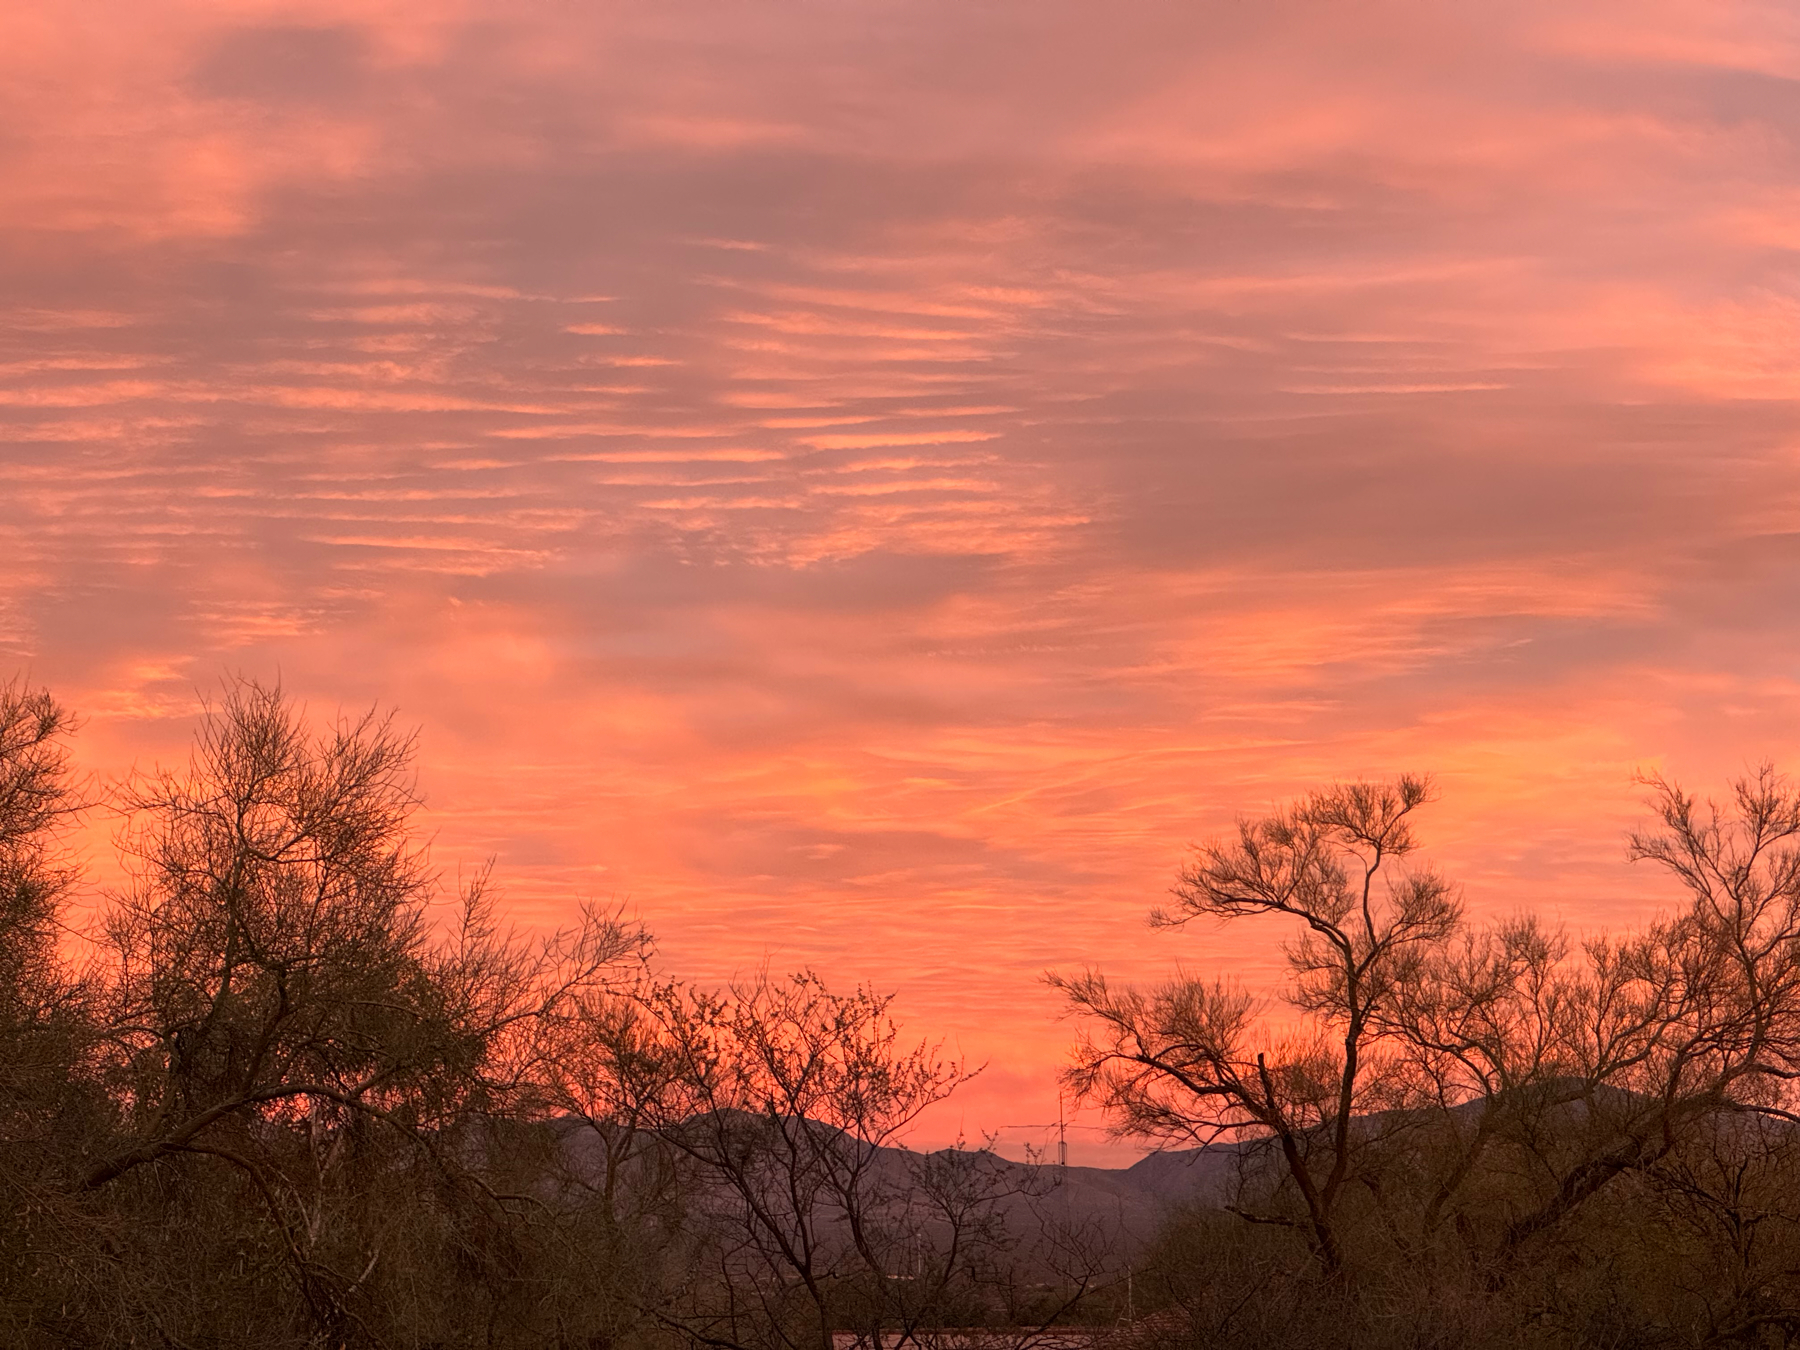 A vibrant sunset with orange and pink hues in the sky, featuring cloud patterns above a silhouette of tree tops and a distant mountain range.